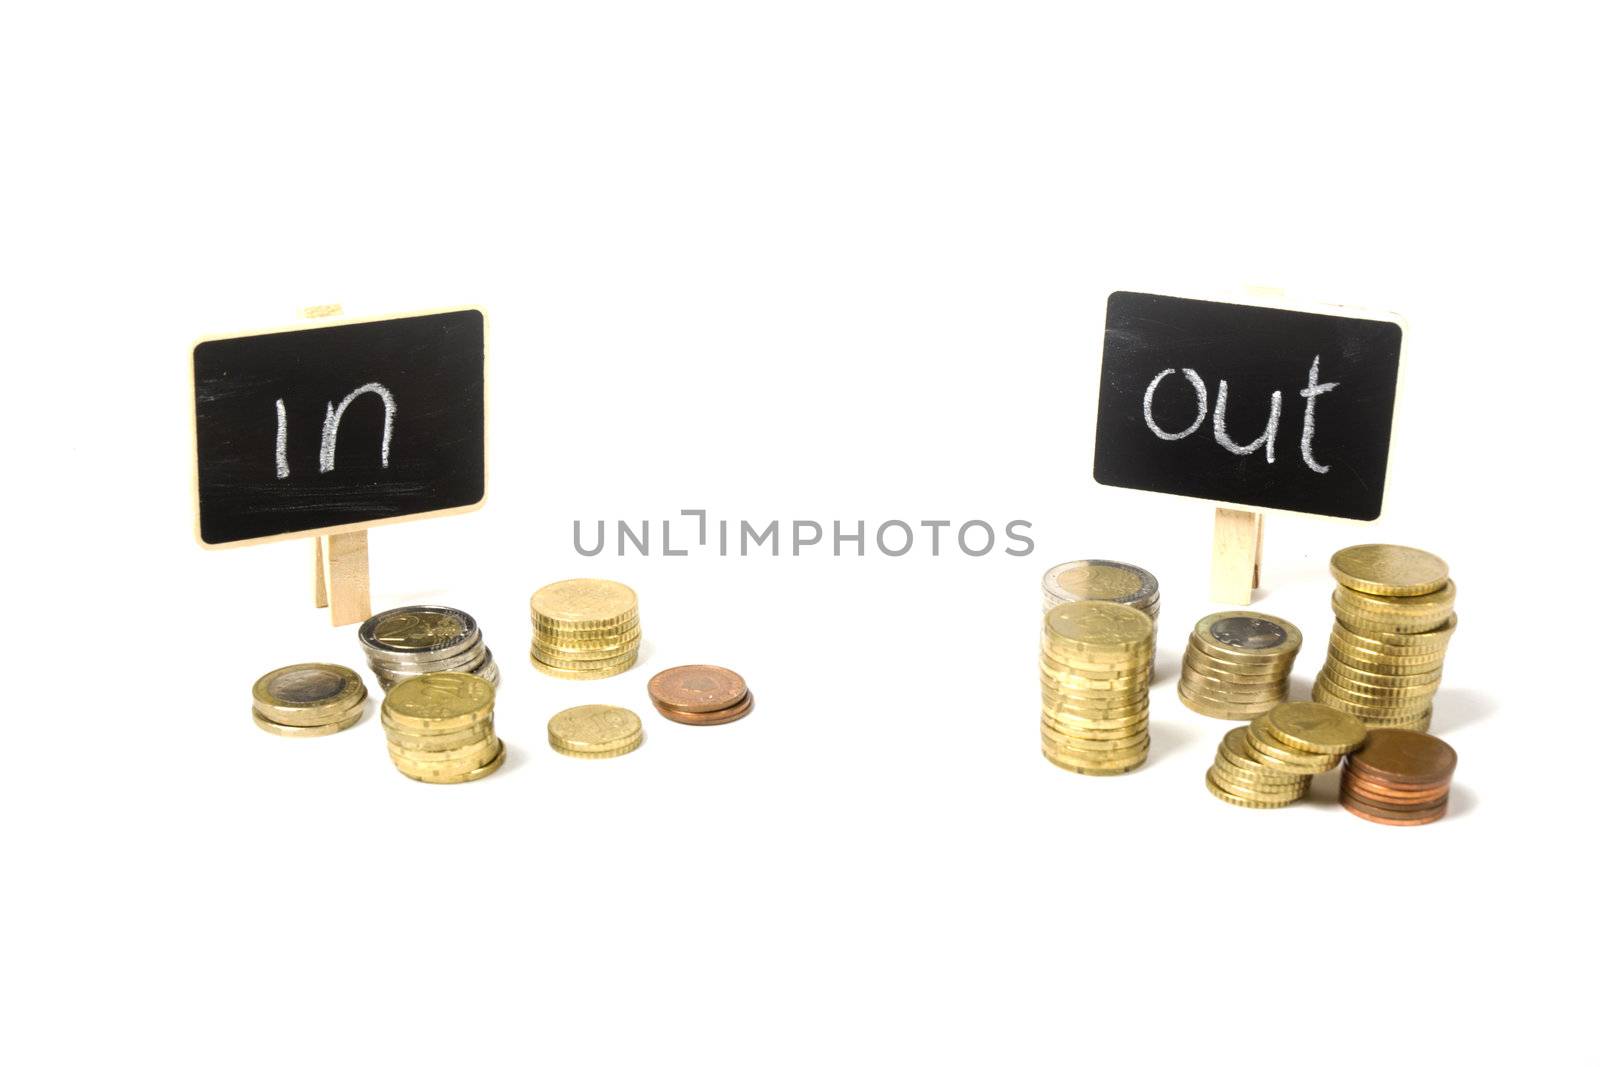 view from income and outcome of the finances by ladyminnie